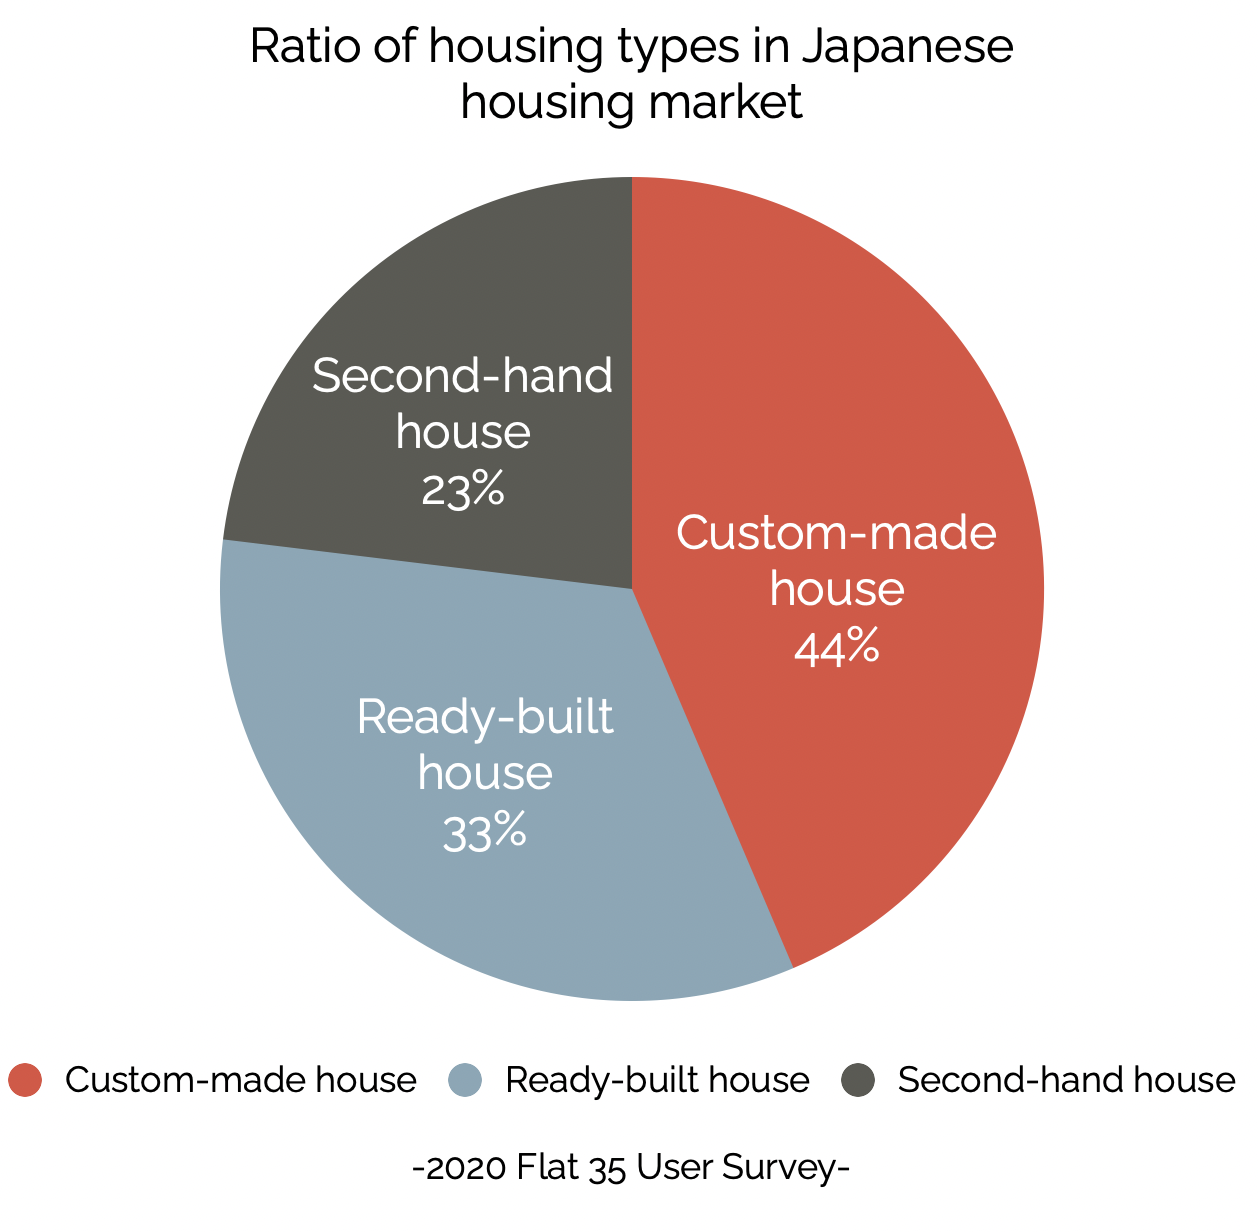 Ratio of ready-built houses and custom-made houses in Japan